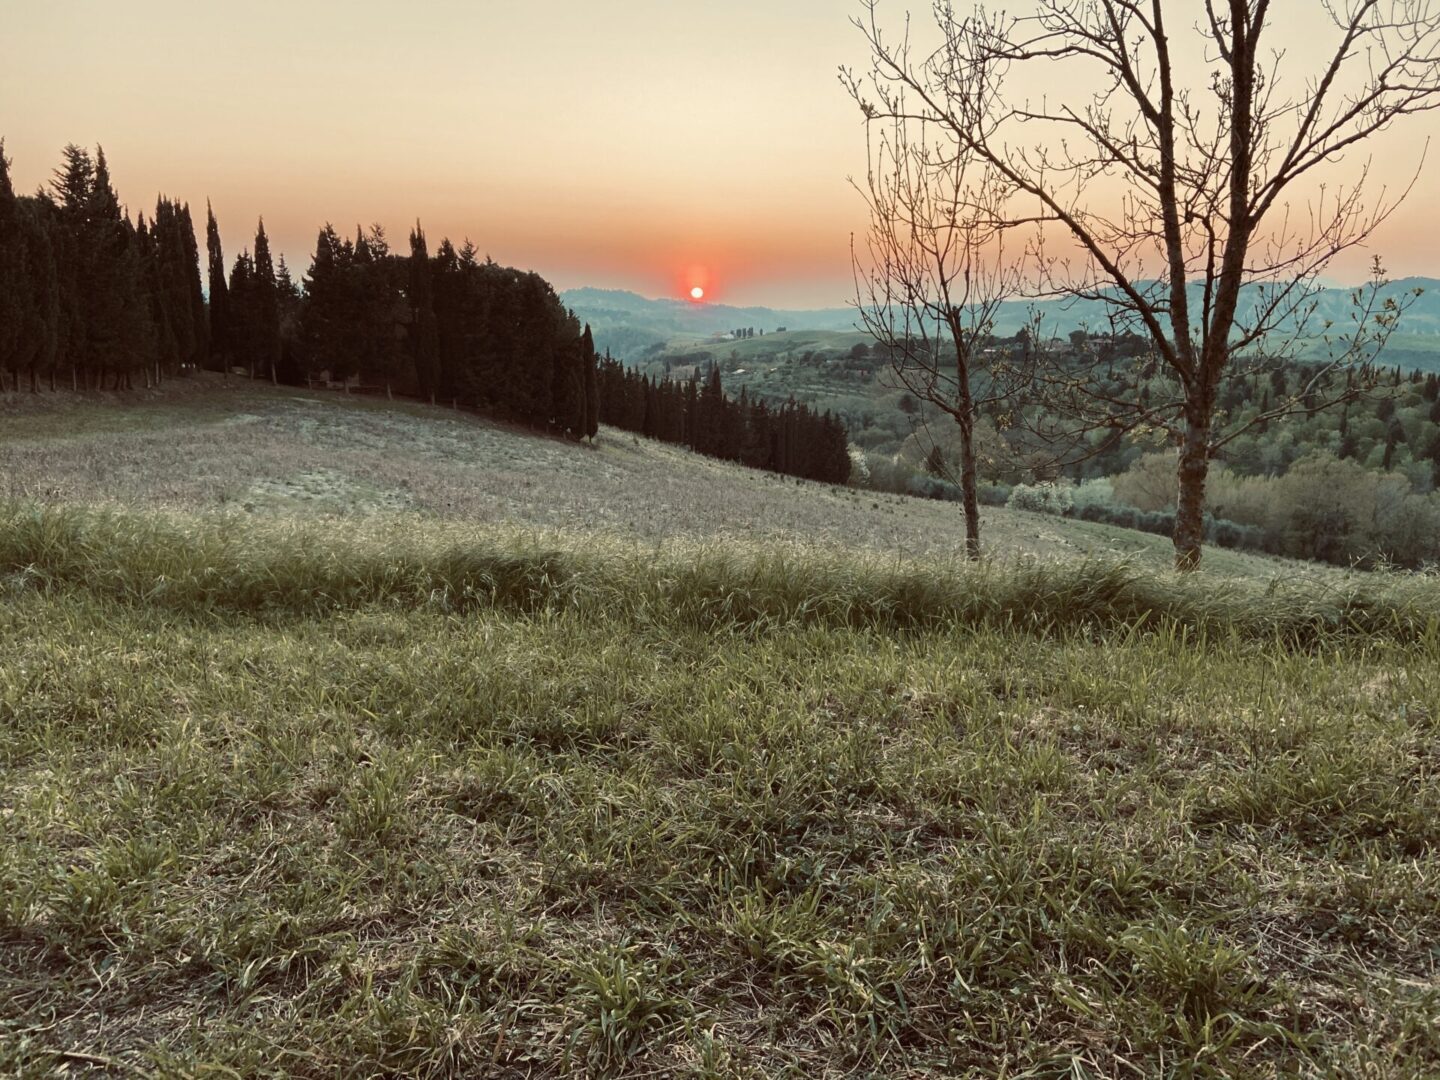 A view of the sun setting over a hill.